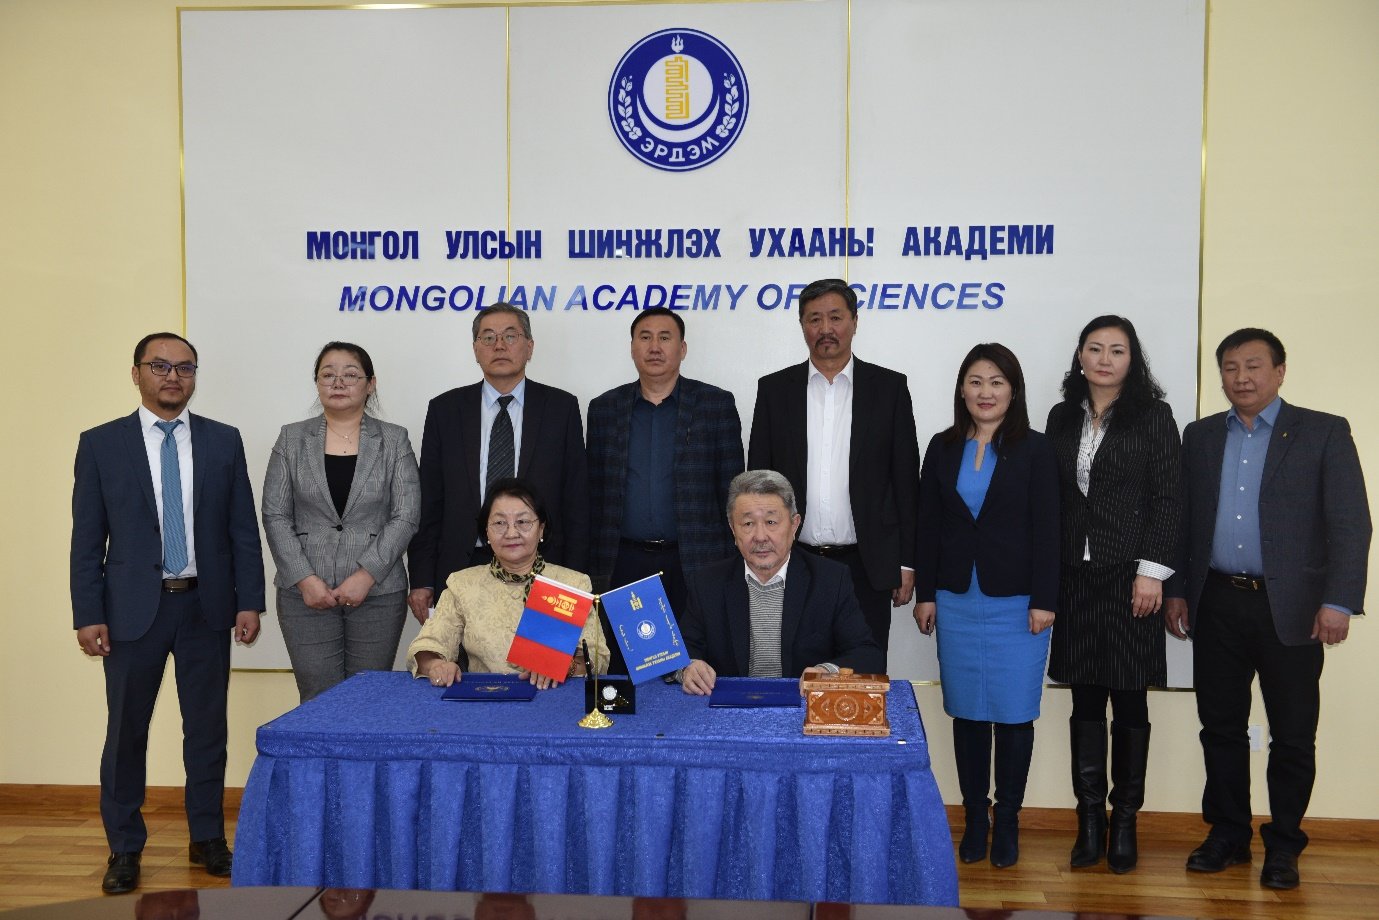 The MoU is signed for cooperation between Mandakh University and Mongolian Academy of Sciences